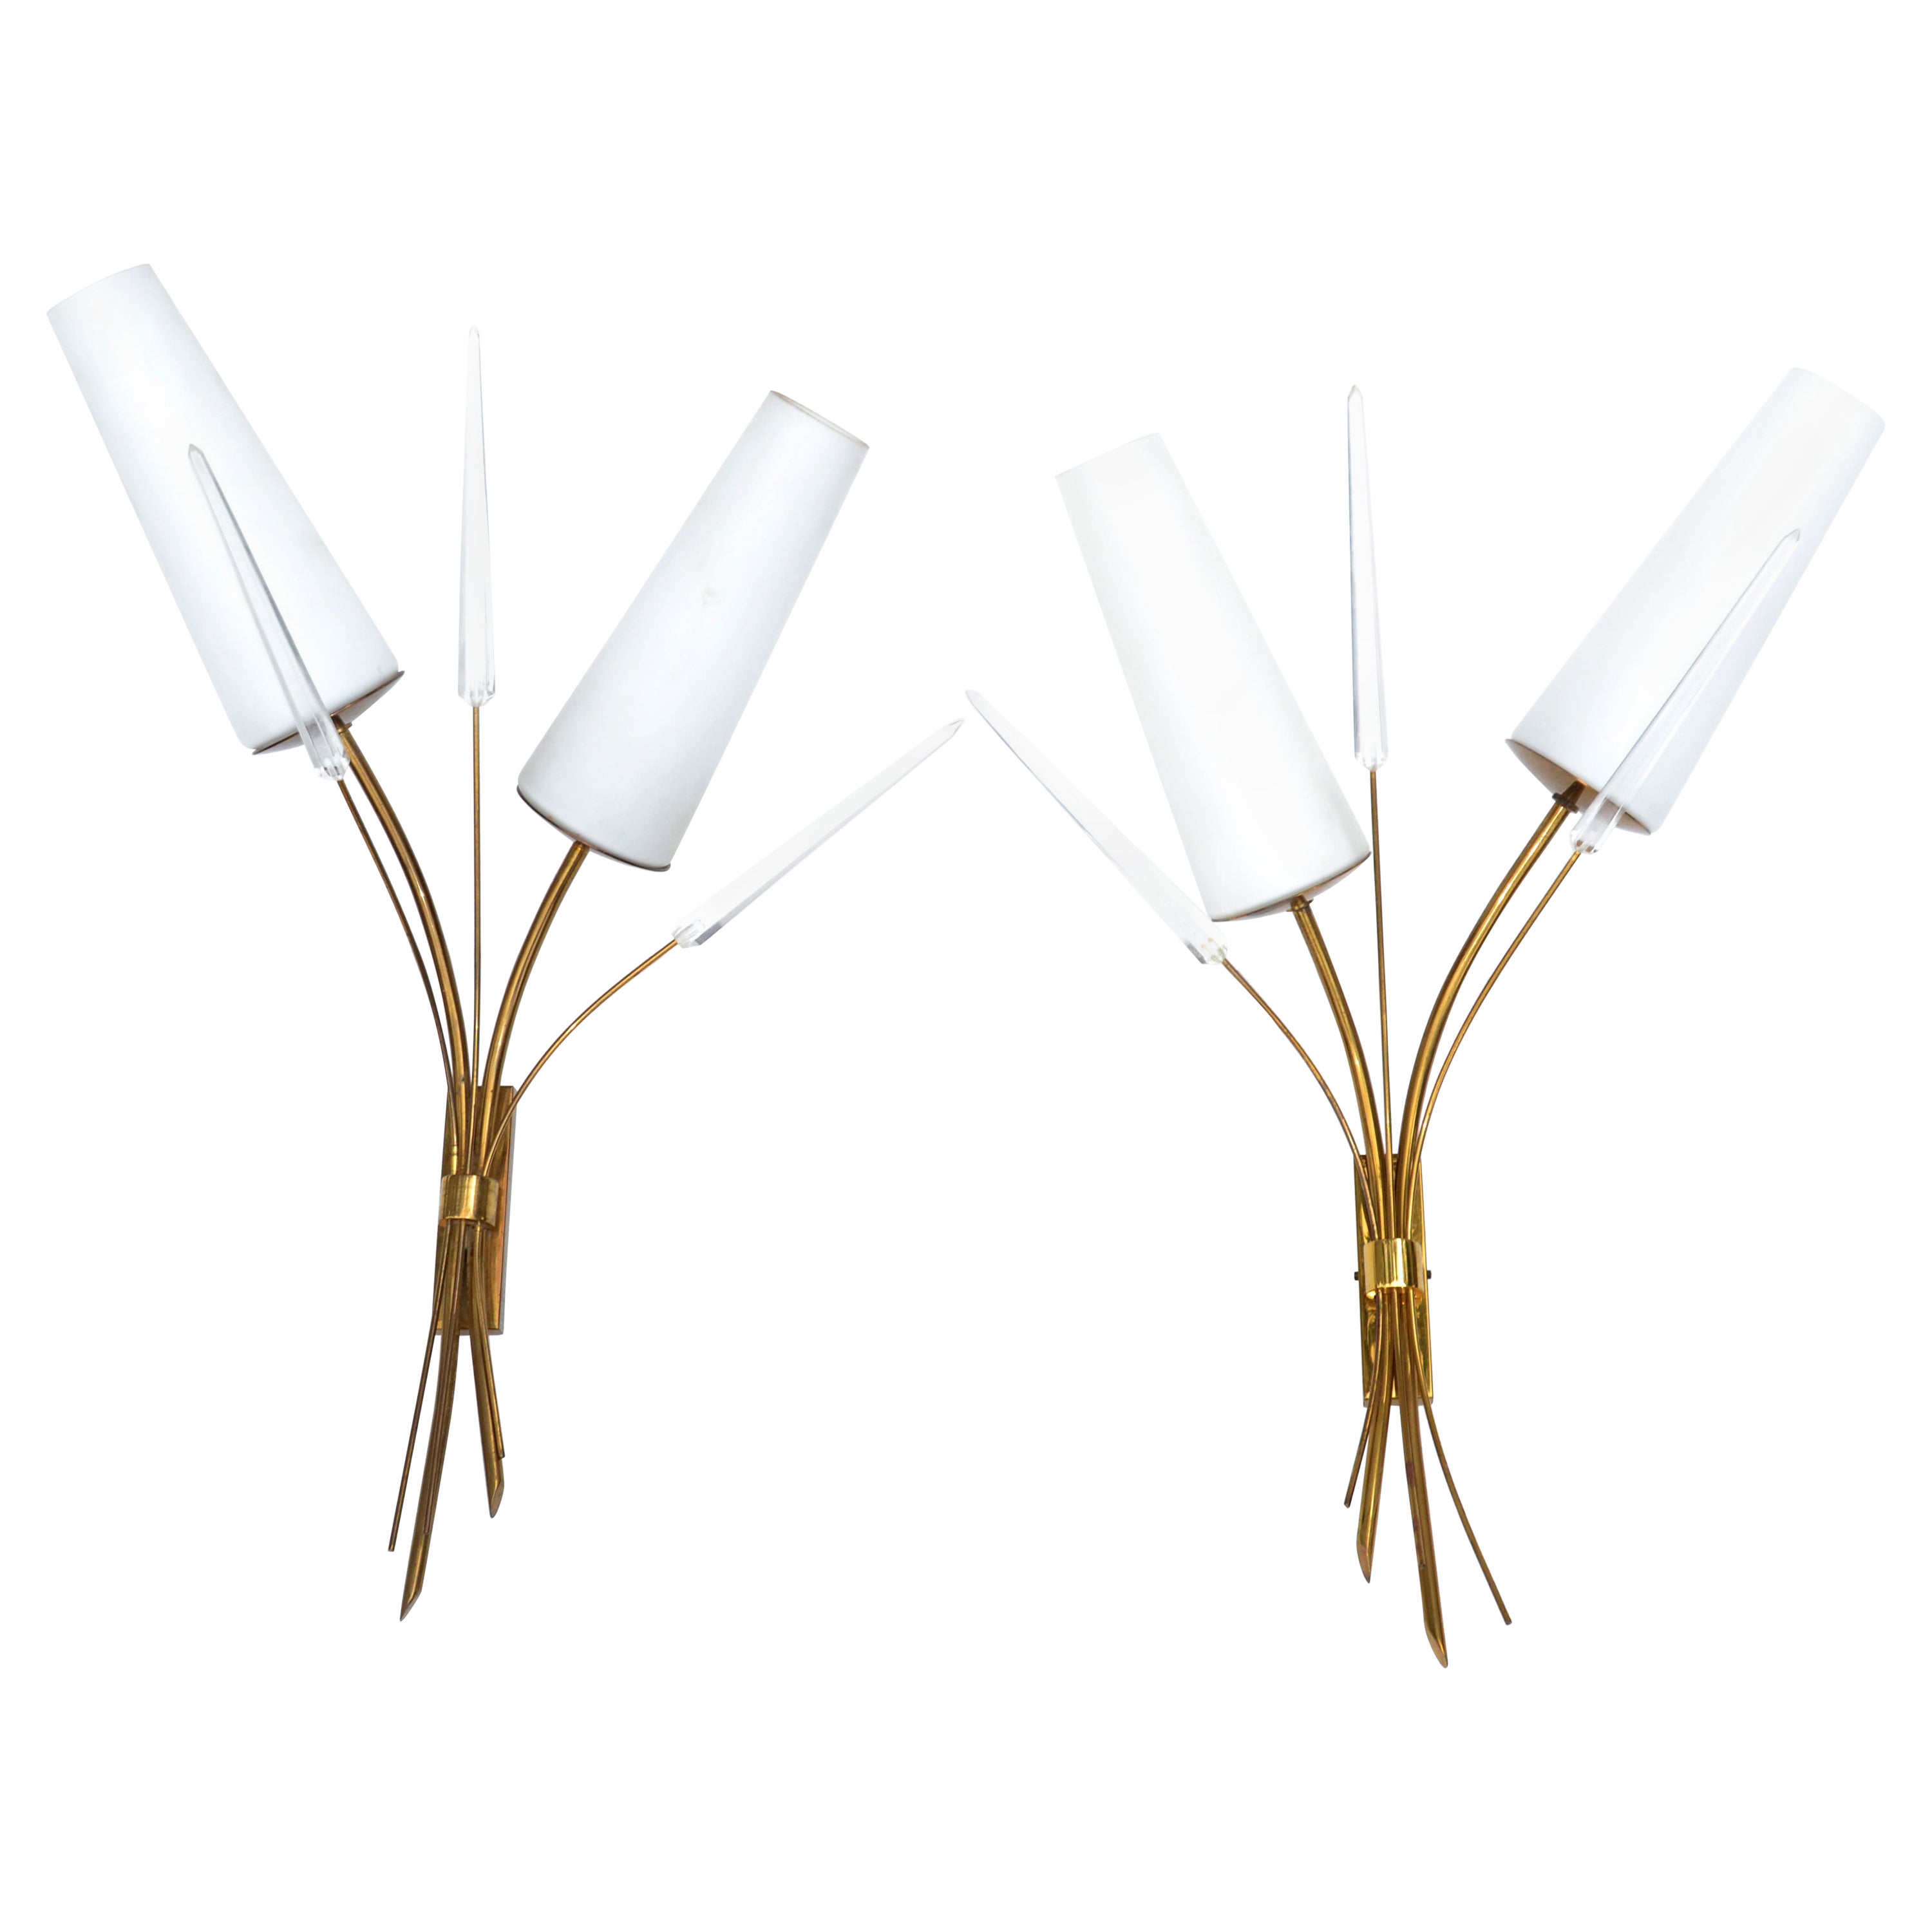 Maison Arlus 2-Light Sconce Faceted Lucite, Brass & Opaline Shade France, Pair